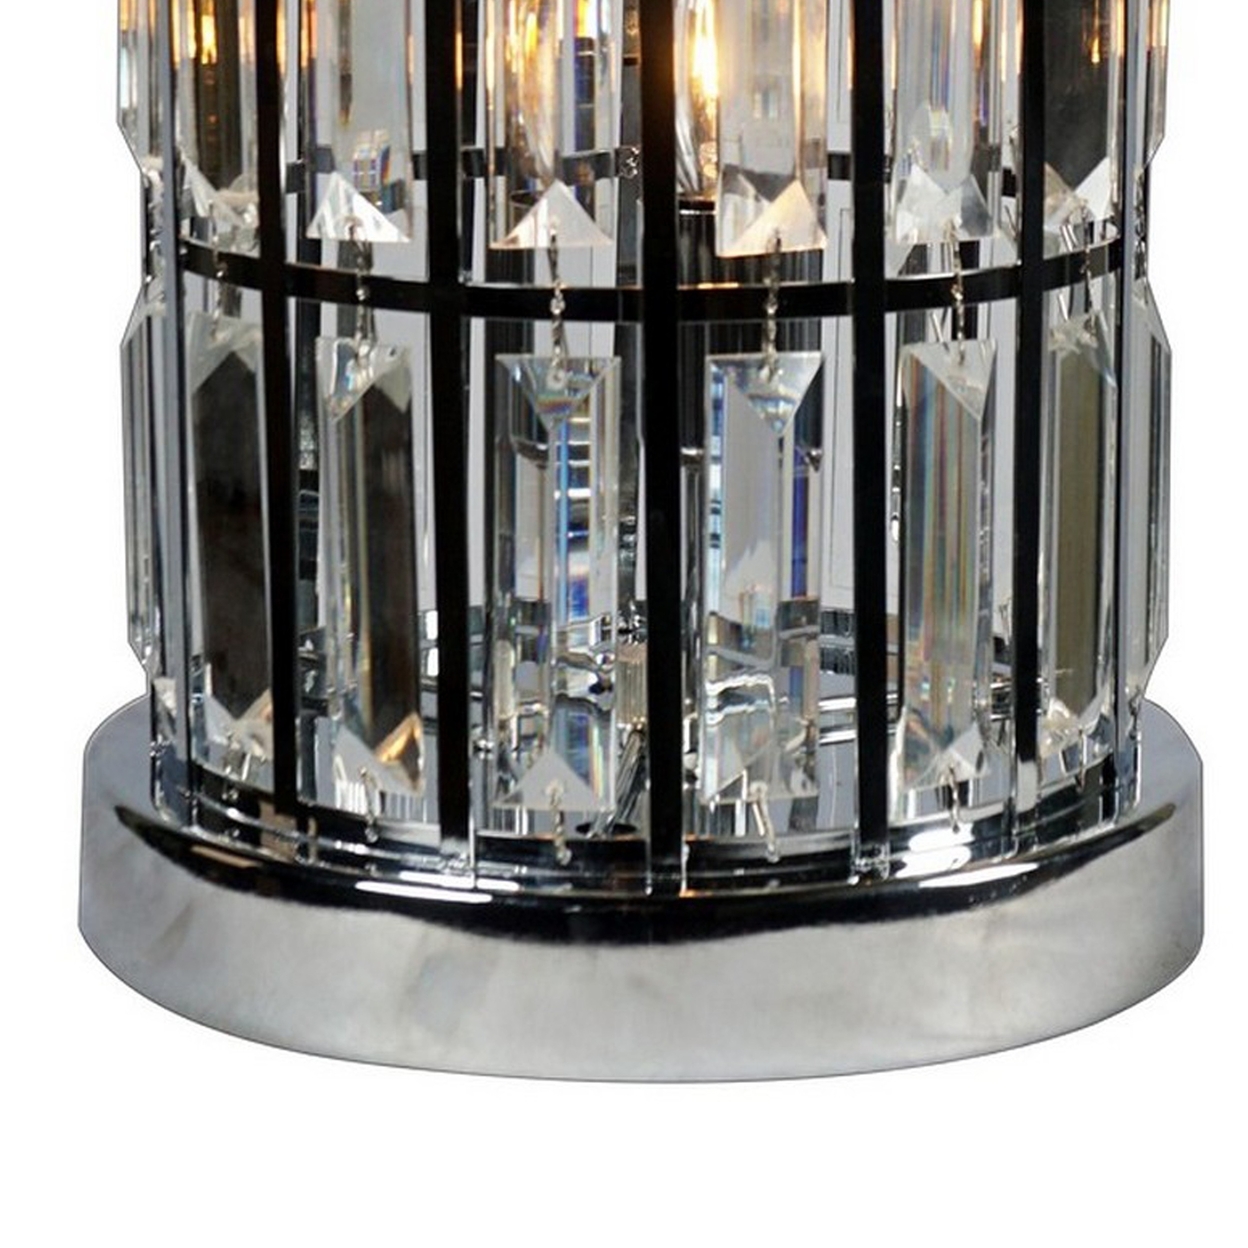 20 Inch Modern Table Lamp, Metal Cage Shade With Glass Accents, Chrome- Saltoro Sherpi